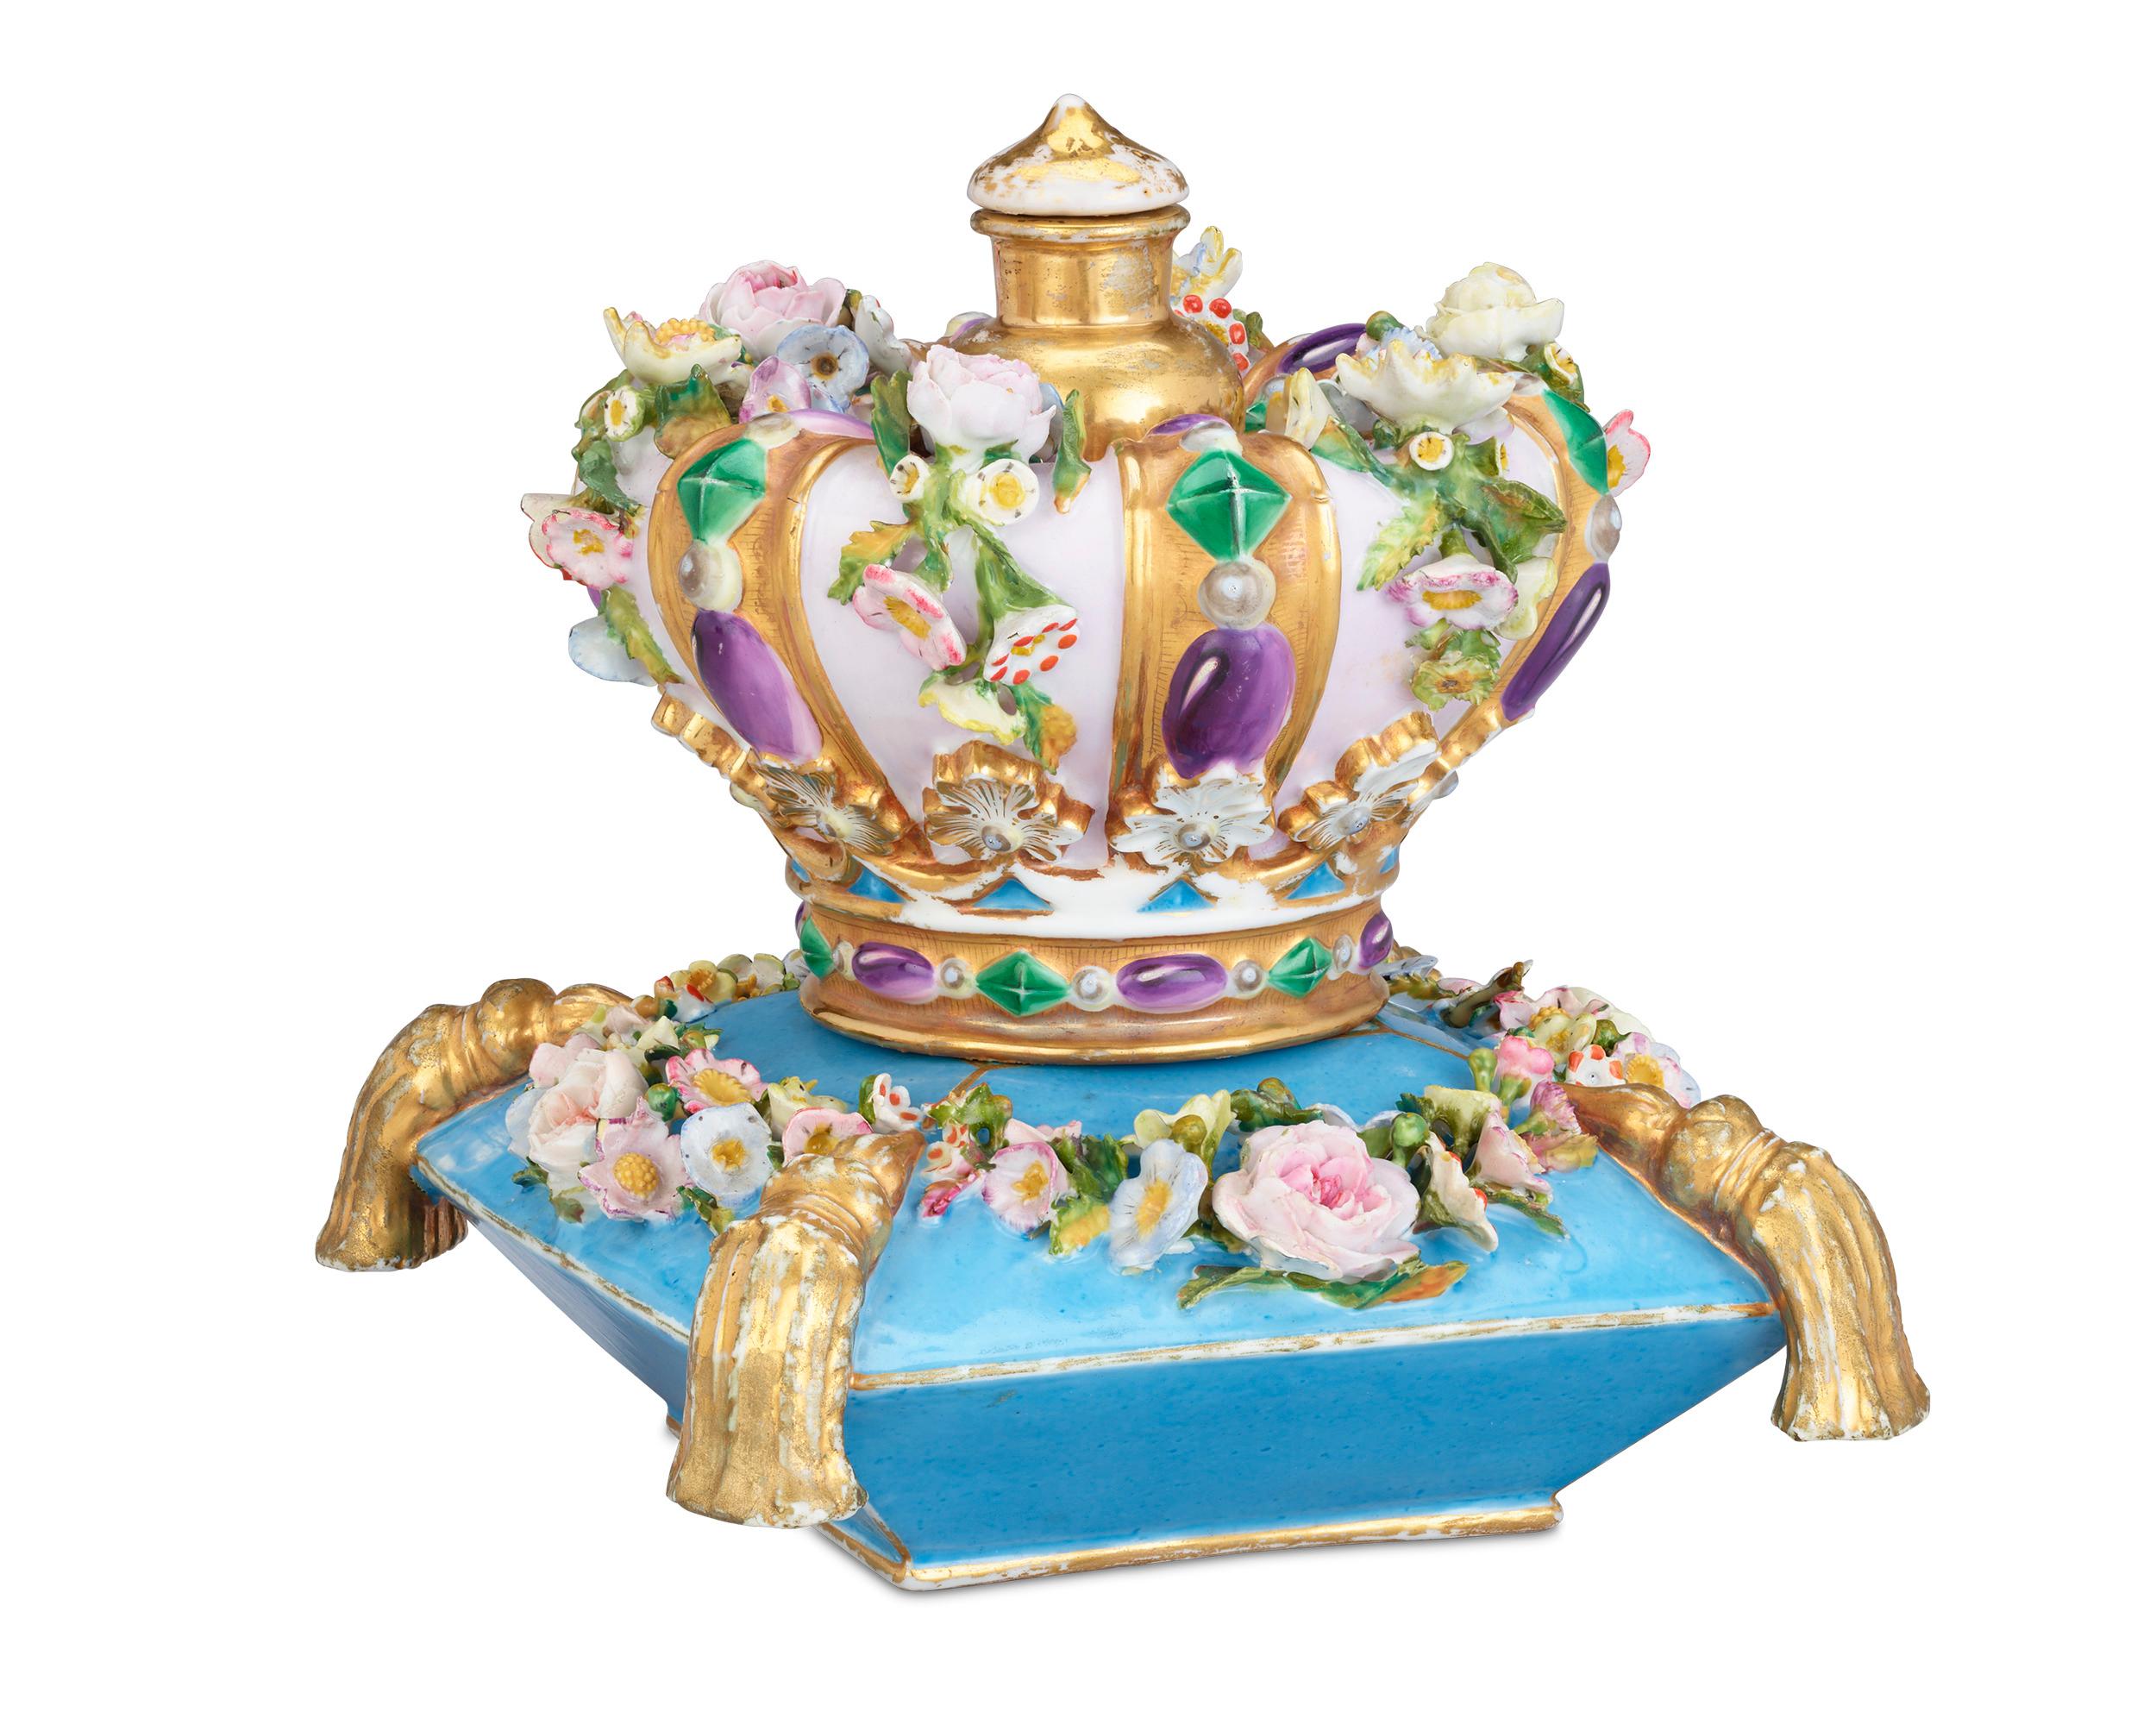 A crown tops this regal perfume bottle crafted by Jacob Petit, one of the most important and well-known makers of French porcelain. The crown is decorated with gems and flowers delicately formed from porcelain and rests upon a plump blue cushion